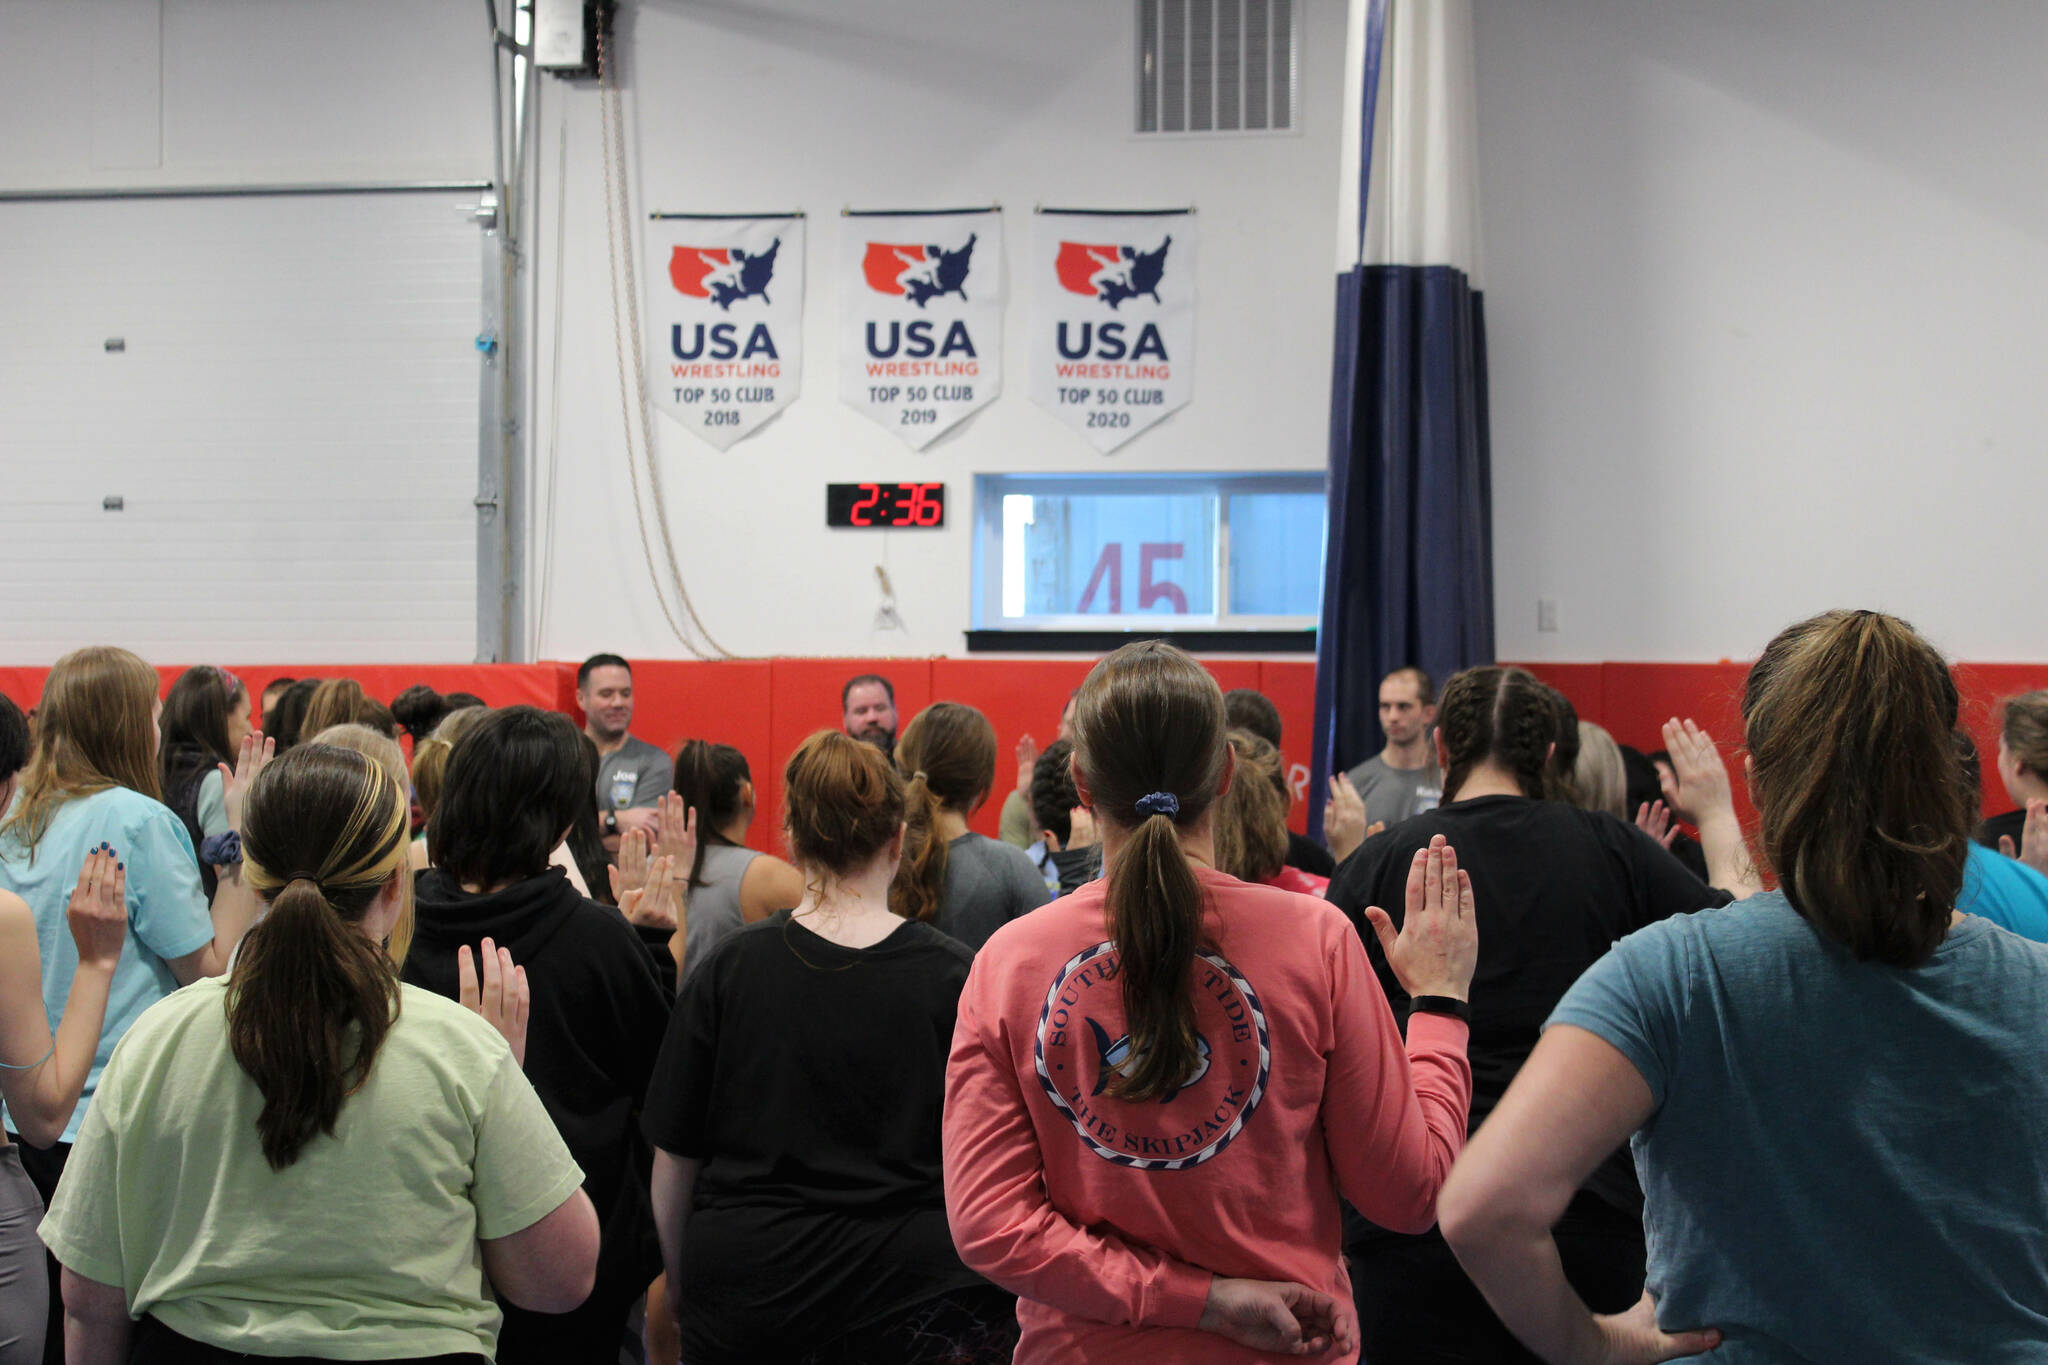 Women take an oath at a “Toss A Cop” event at the All American Training Center on Saturday, Jan. 21, 2023, in Soldotna, Alaska. (Ashlyn O’Hara/Peninsula Clarion)